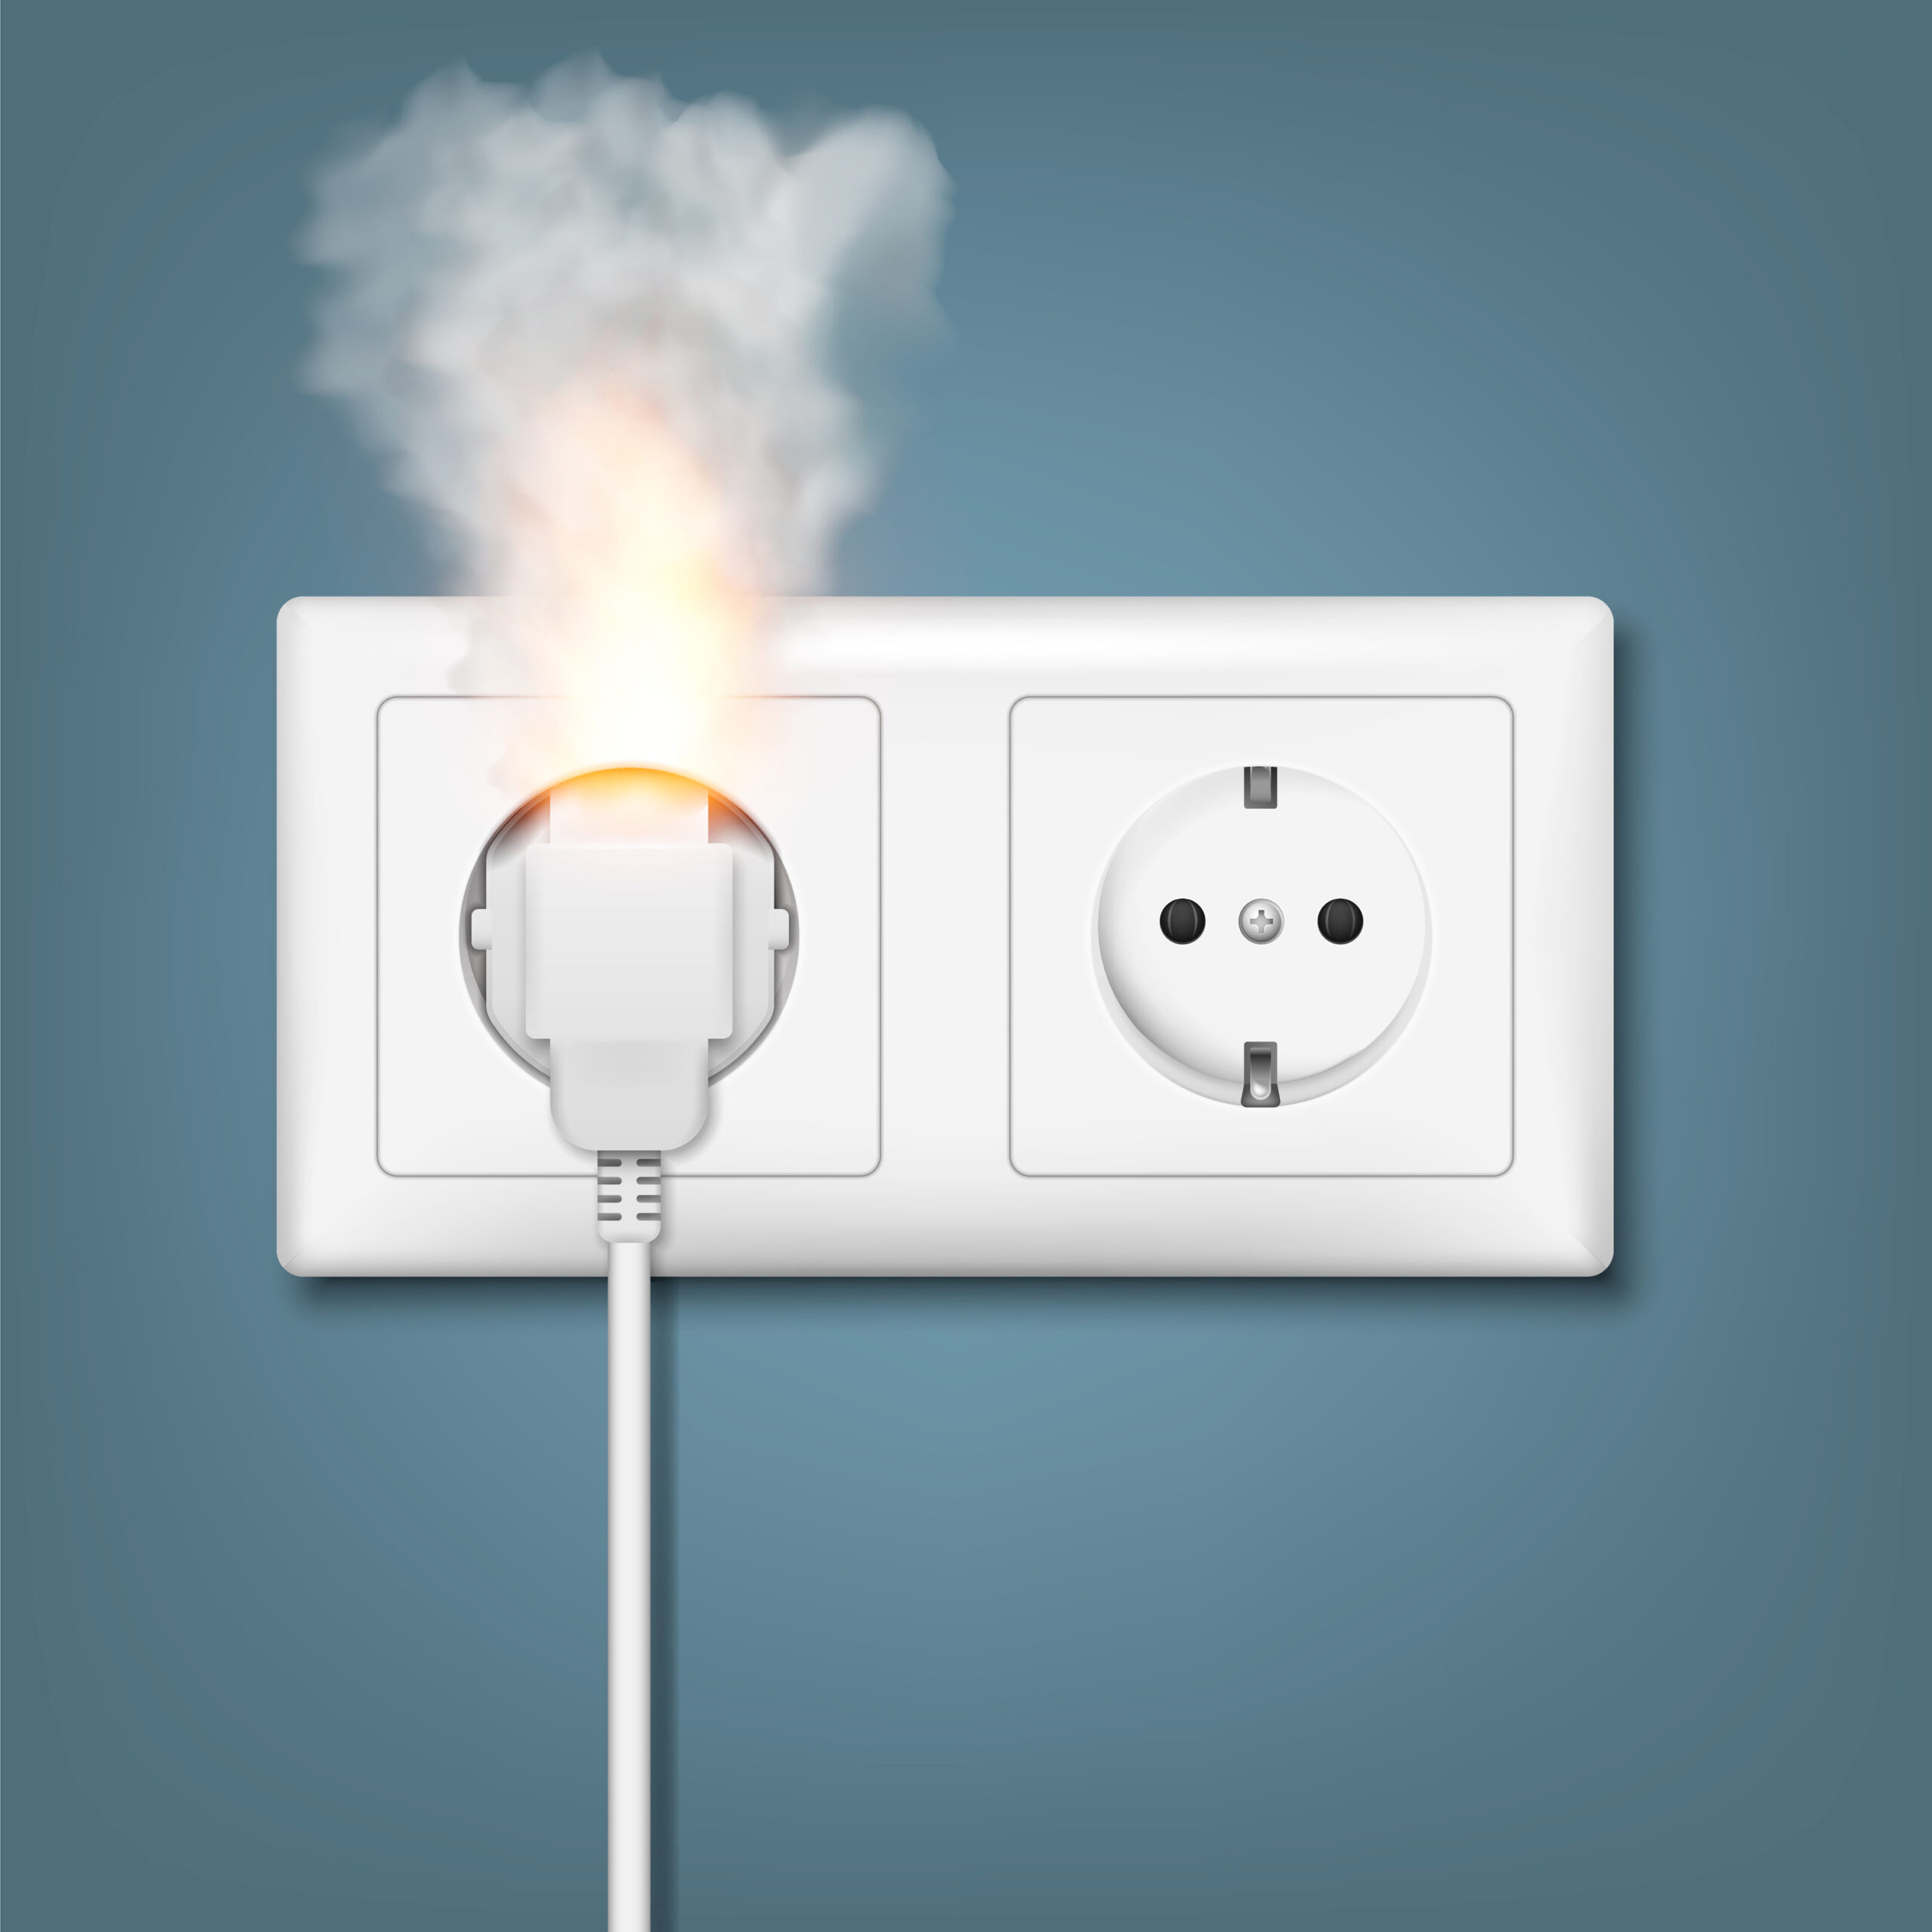 Fire wiring emergency: Realistic depiction of a socket and plug on fire due to overload. Contact Electrical Services in Whitehouse, TX for professional and expert electrician assistance.